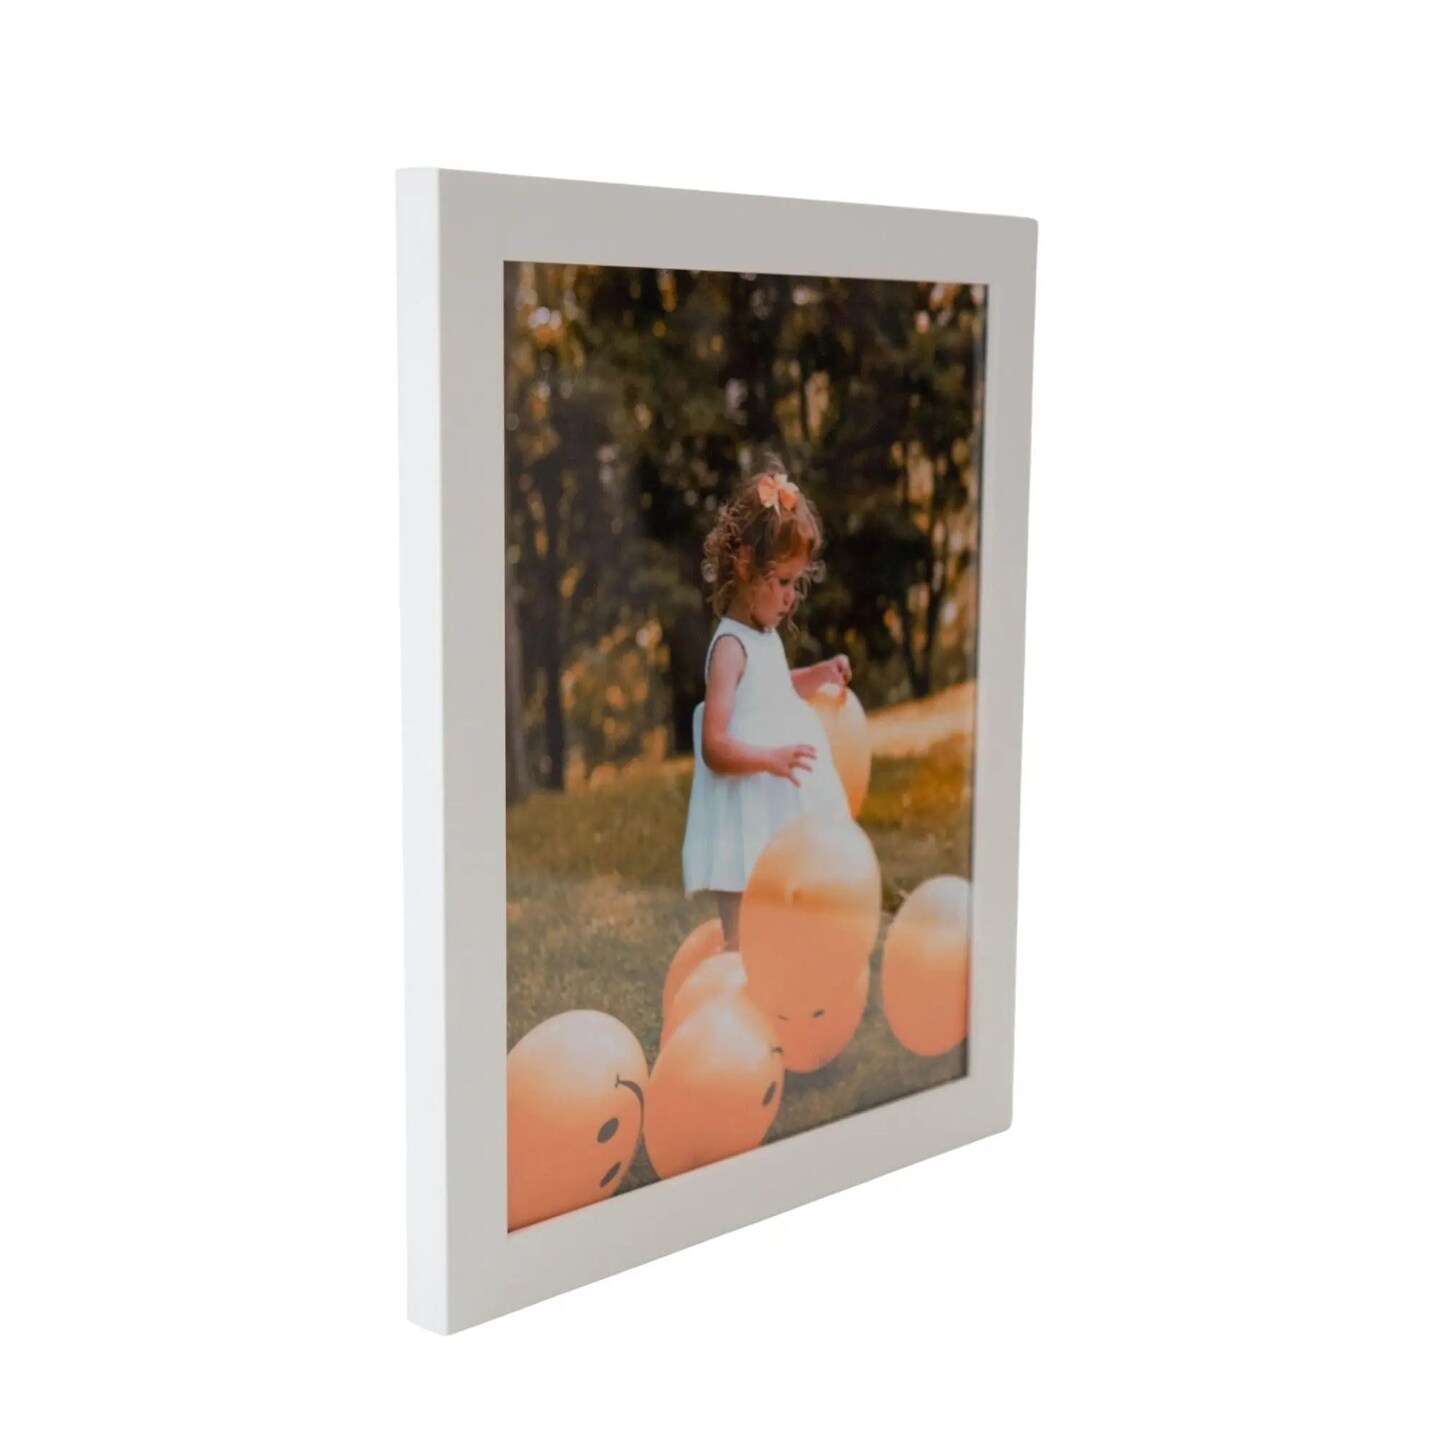  Modern 24x16 Picture Frame Black Wood Acrylic Glass - Gallery  Wall Hanging 24 x 16 Poster Frame - Wall Art Print Photo 16x24 Inch